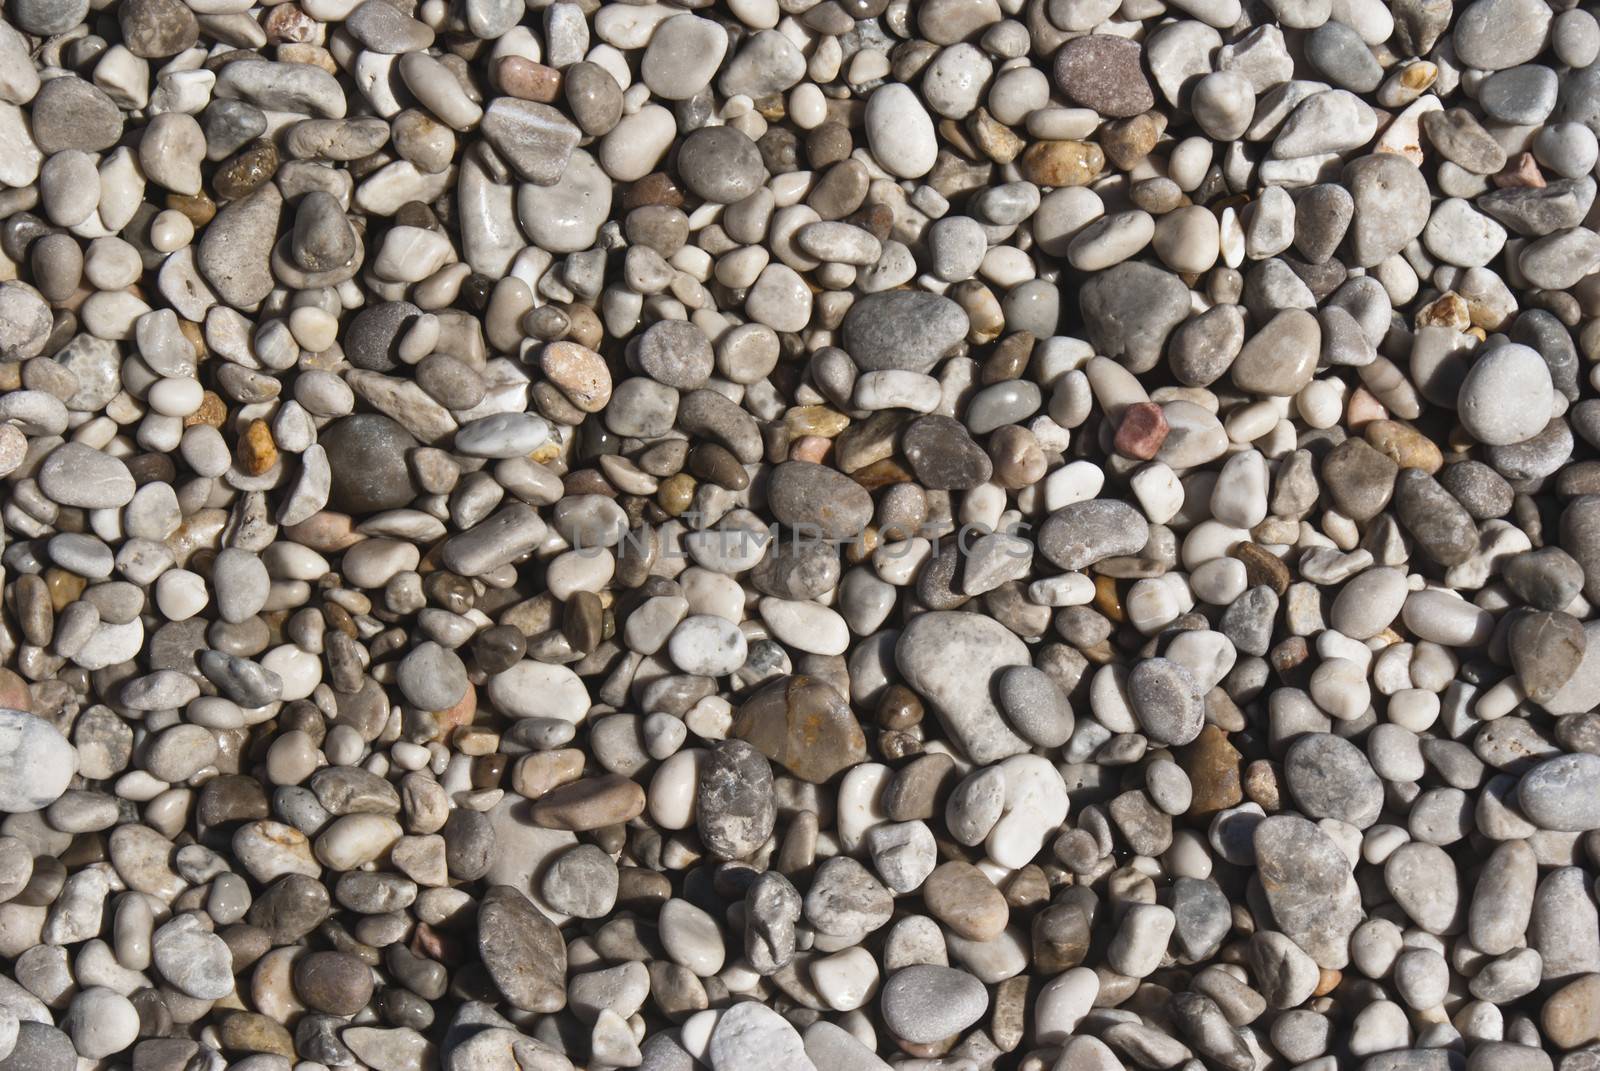 All rounded tiny pebbles from beach, a natural background